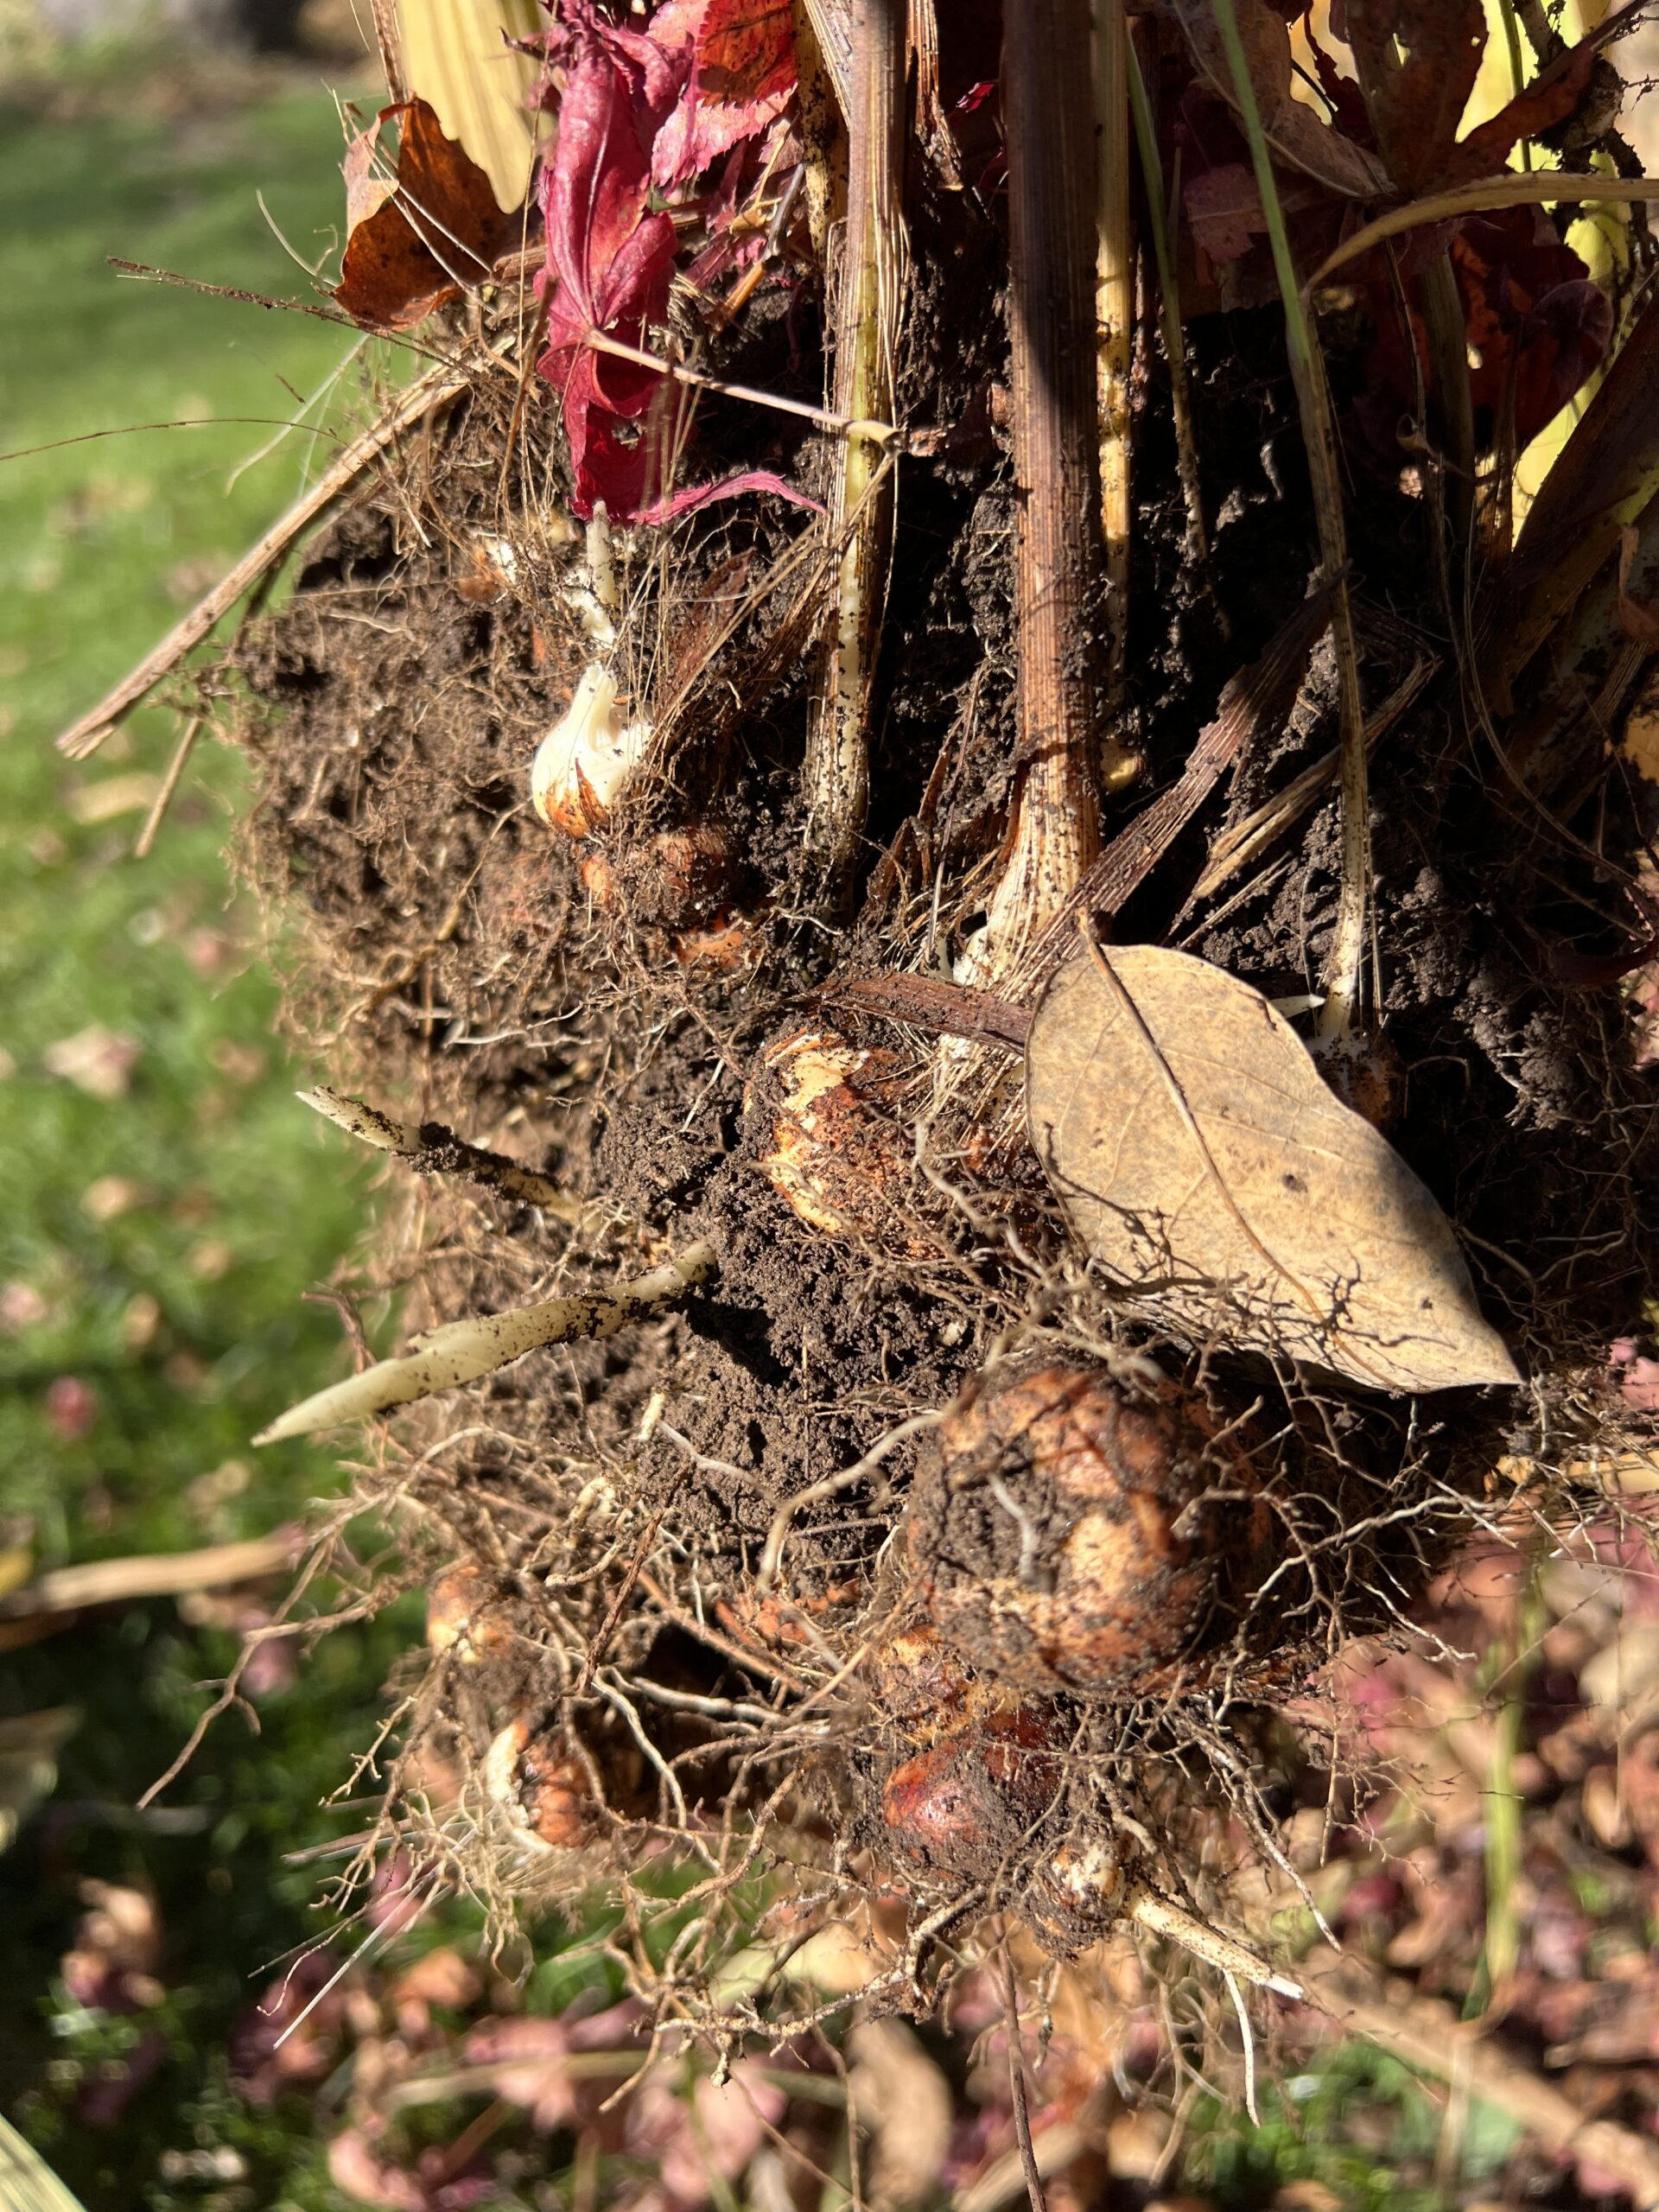 A mass of Crocosmia stems with the corms still attached and hanging below. In this one group there were about 25 corms.
ANDREW MESSINGER